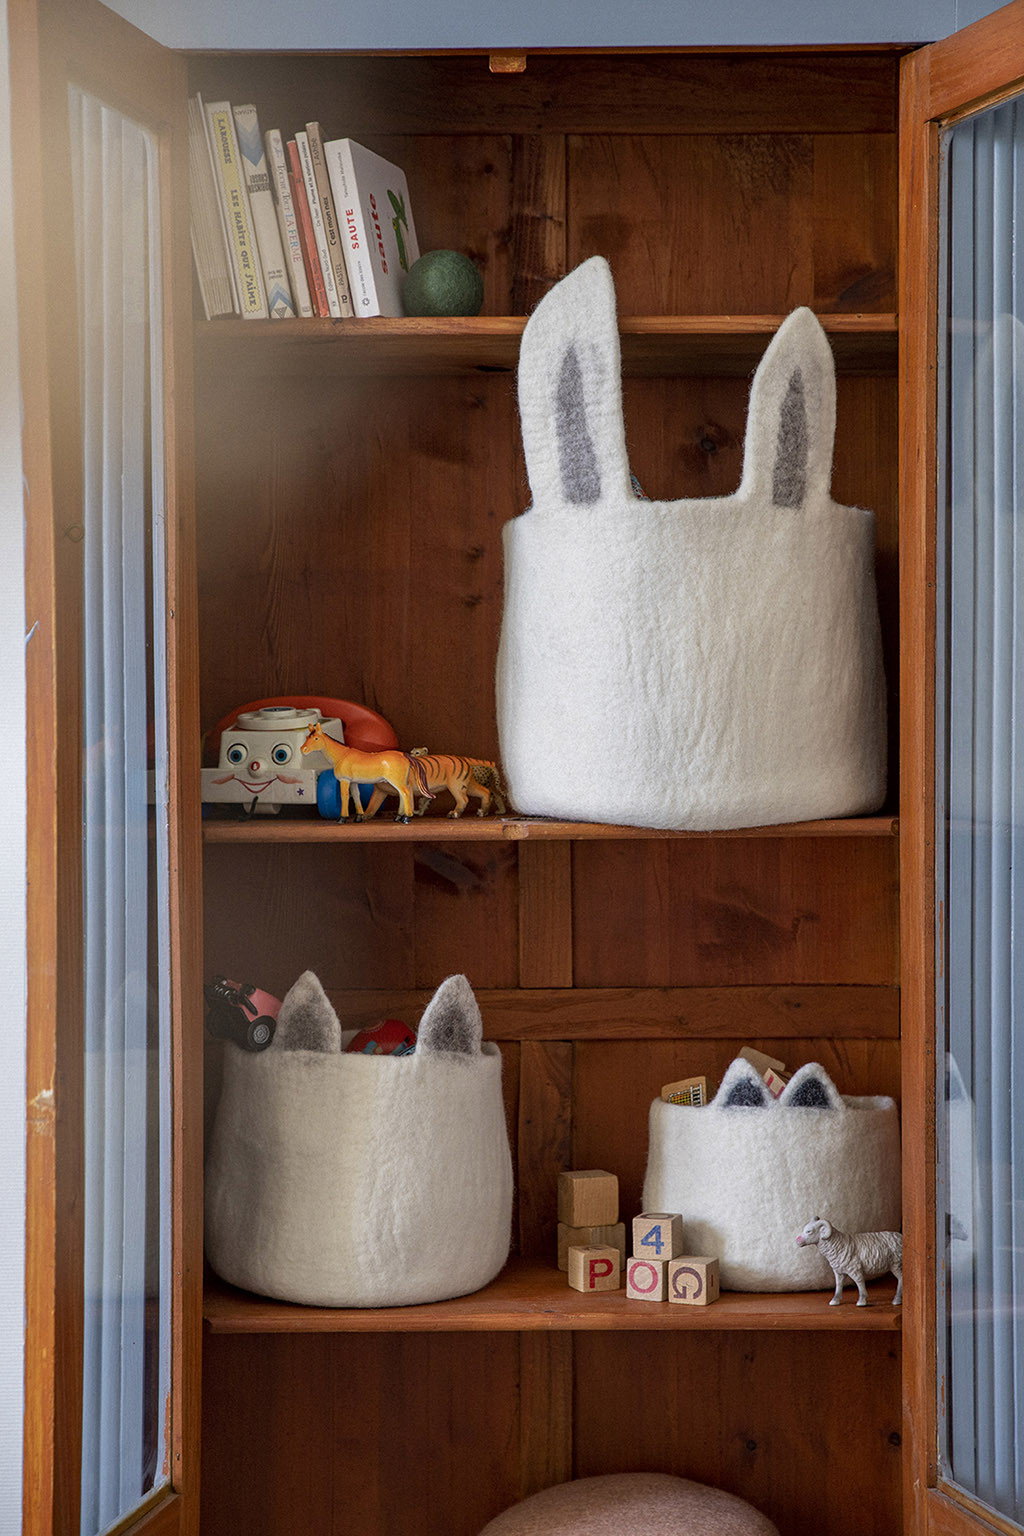 3 felt baskets in the shape of animals for a child's room